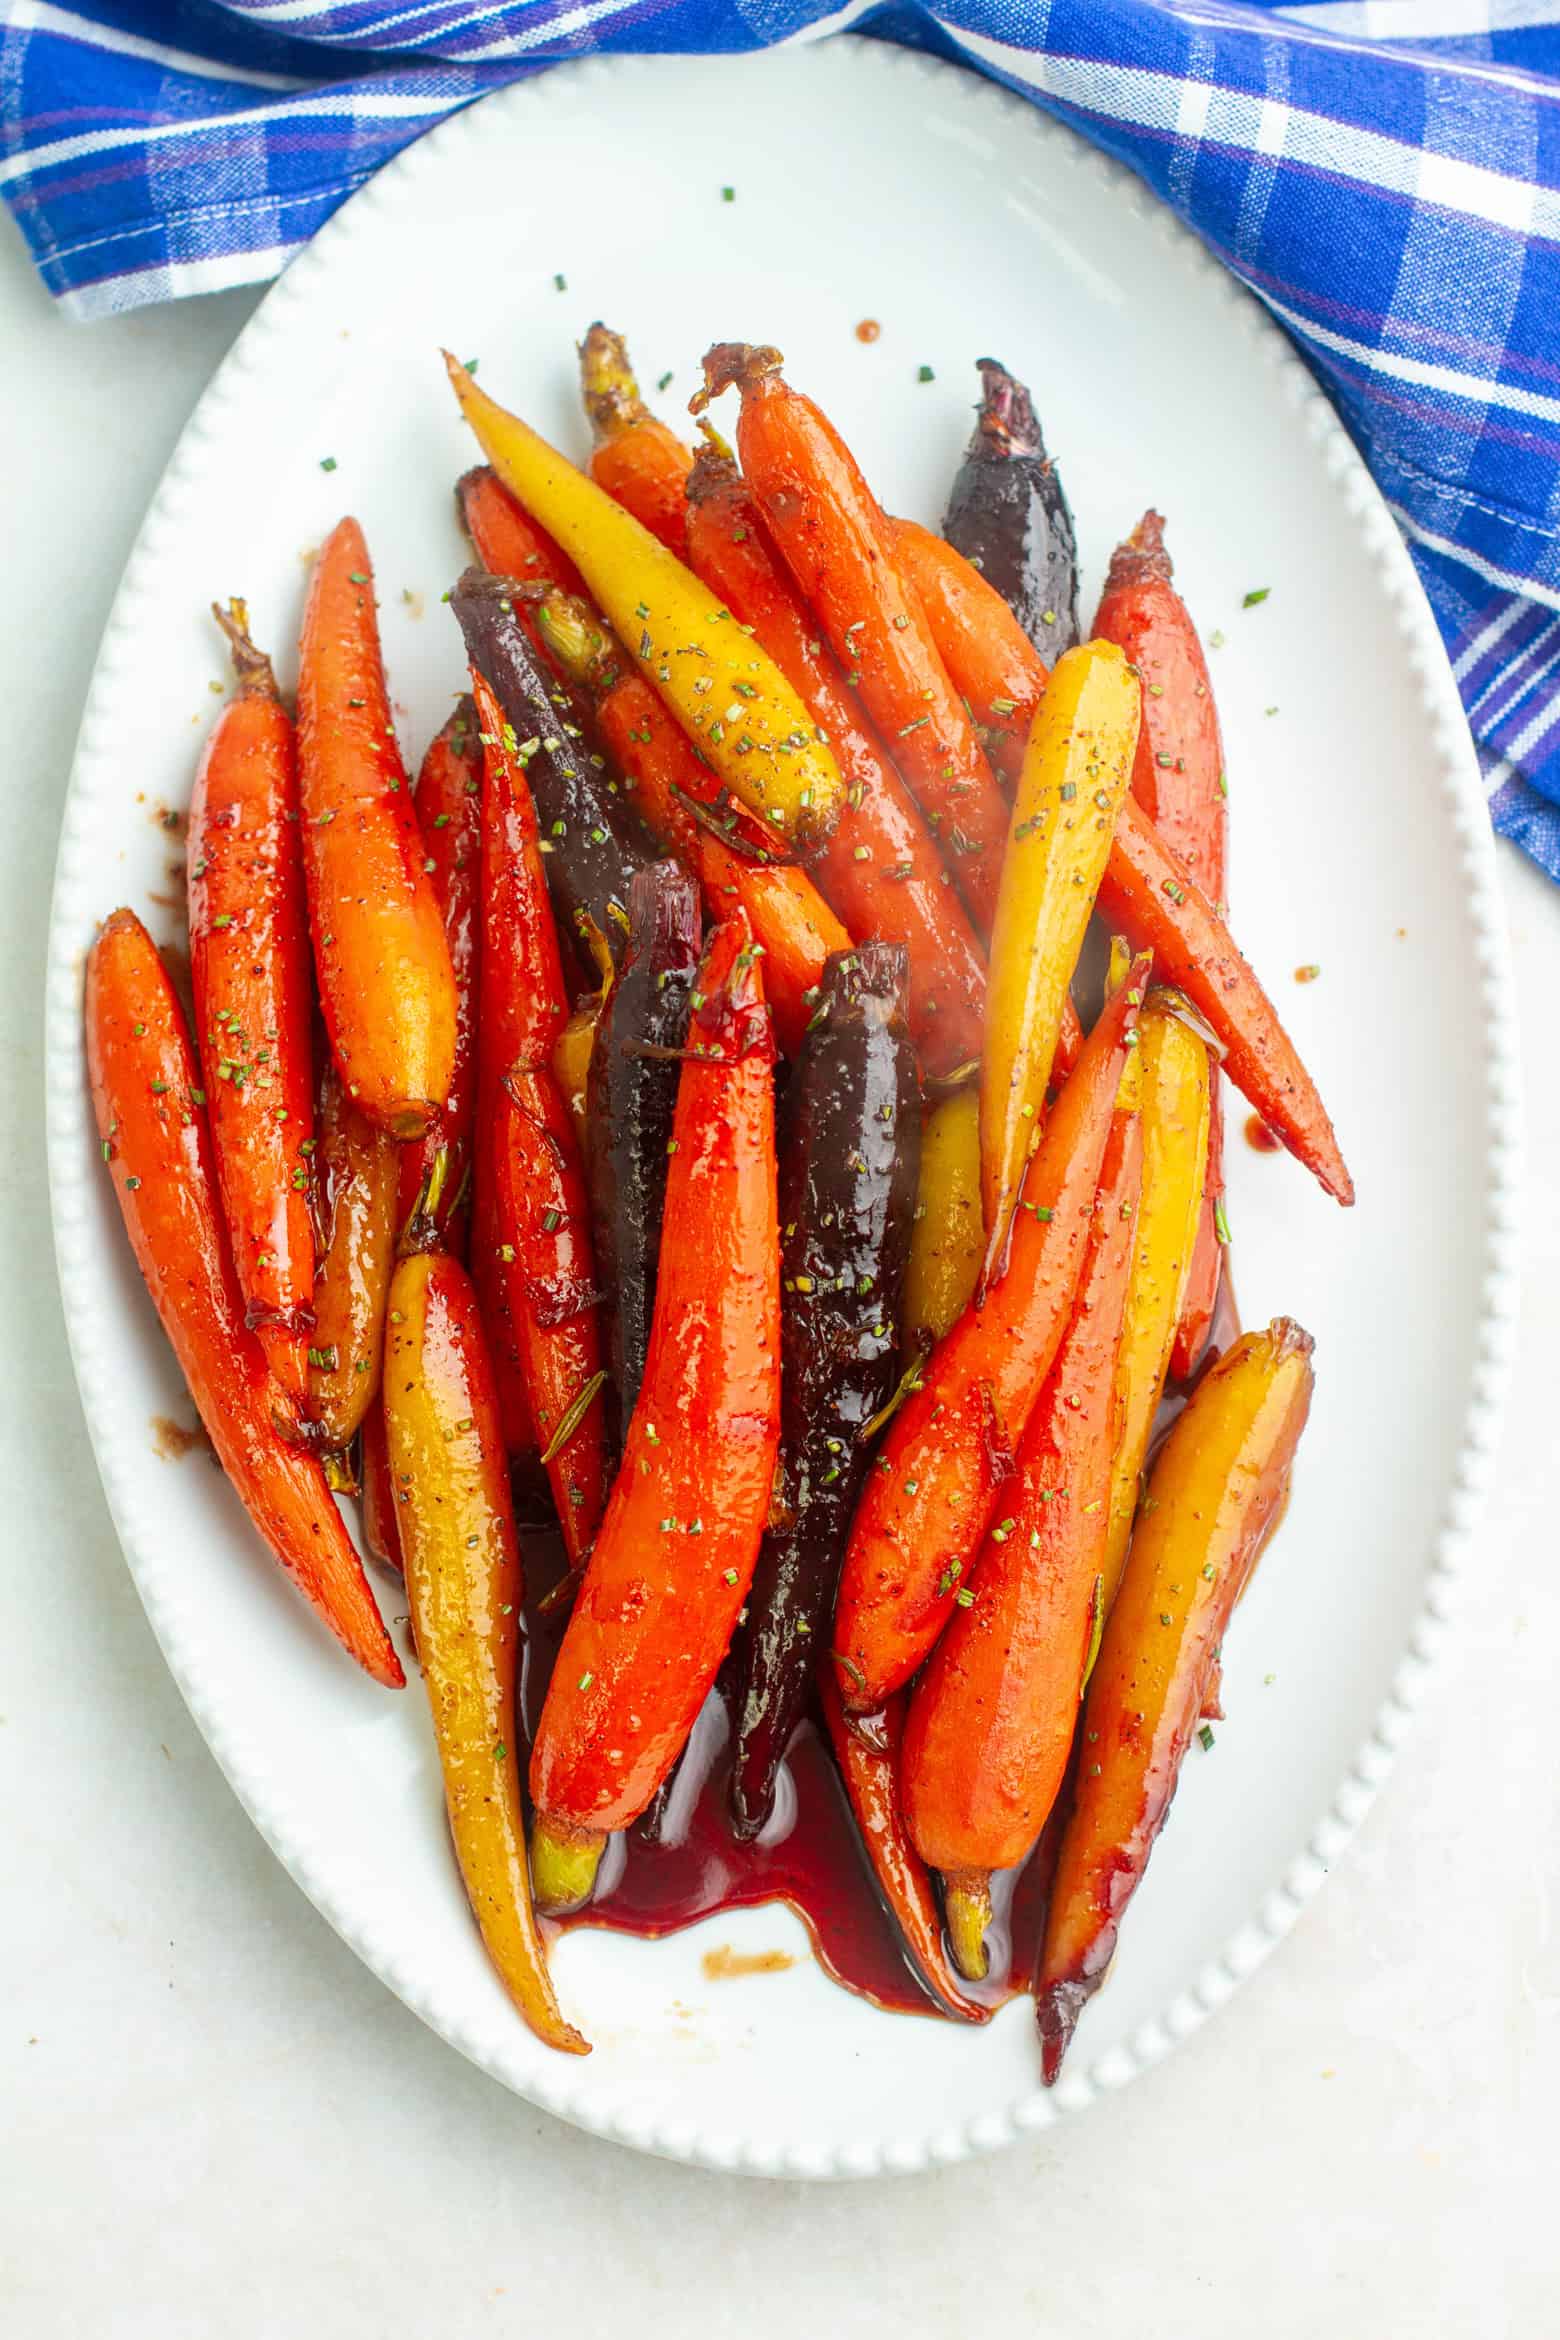 Sauteed Carrots on a platter.